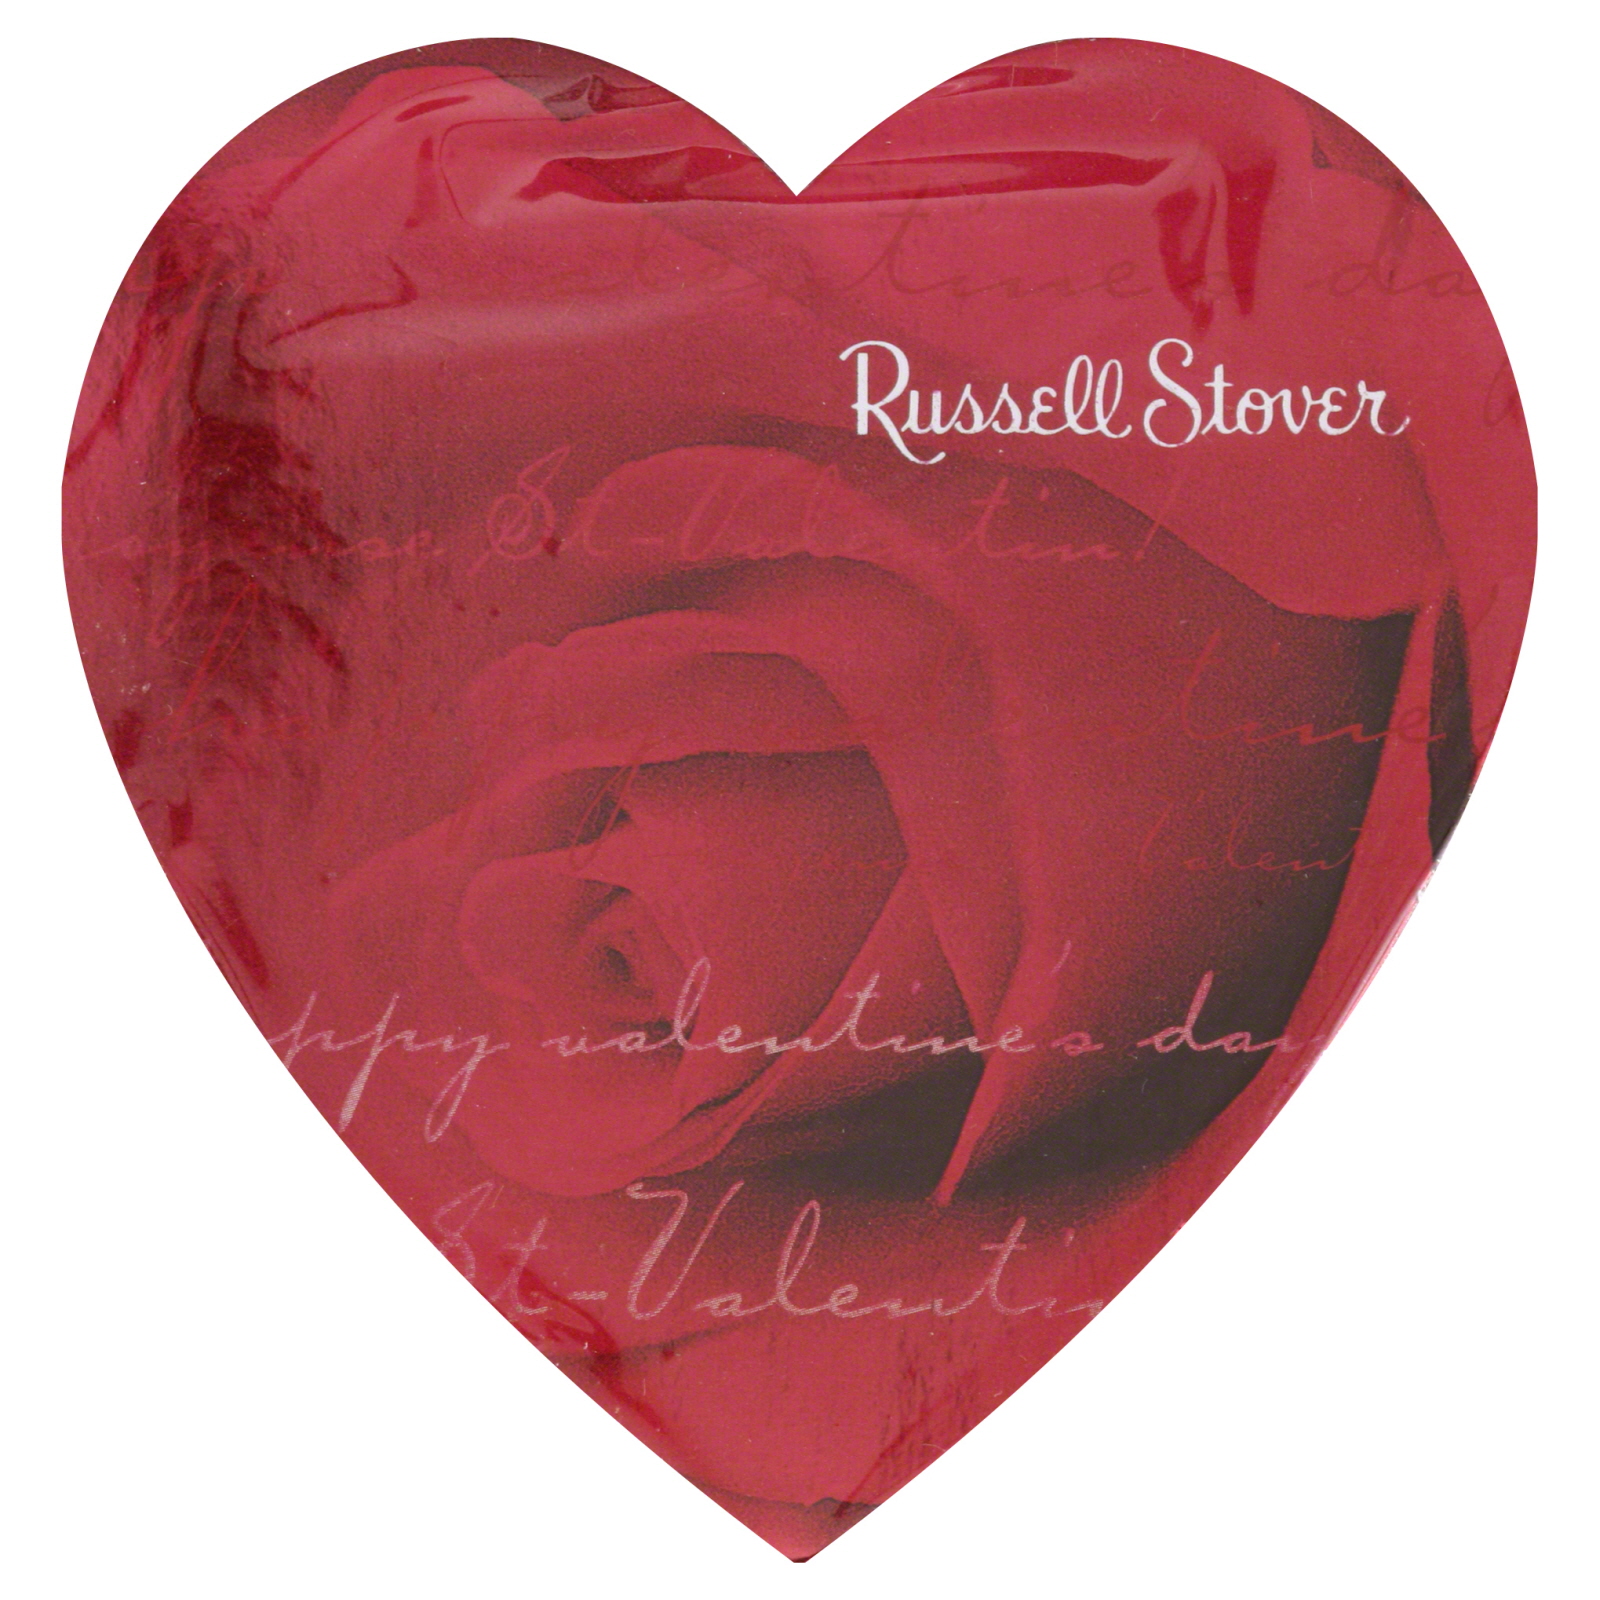 Russell Stover Valentine Photo Heart Box of Assorted Chocolate 1.75 Ounce